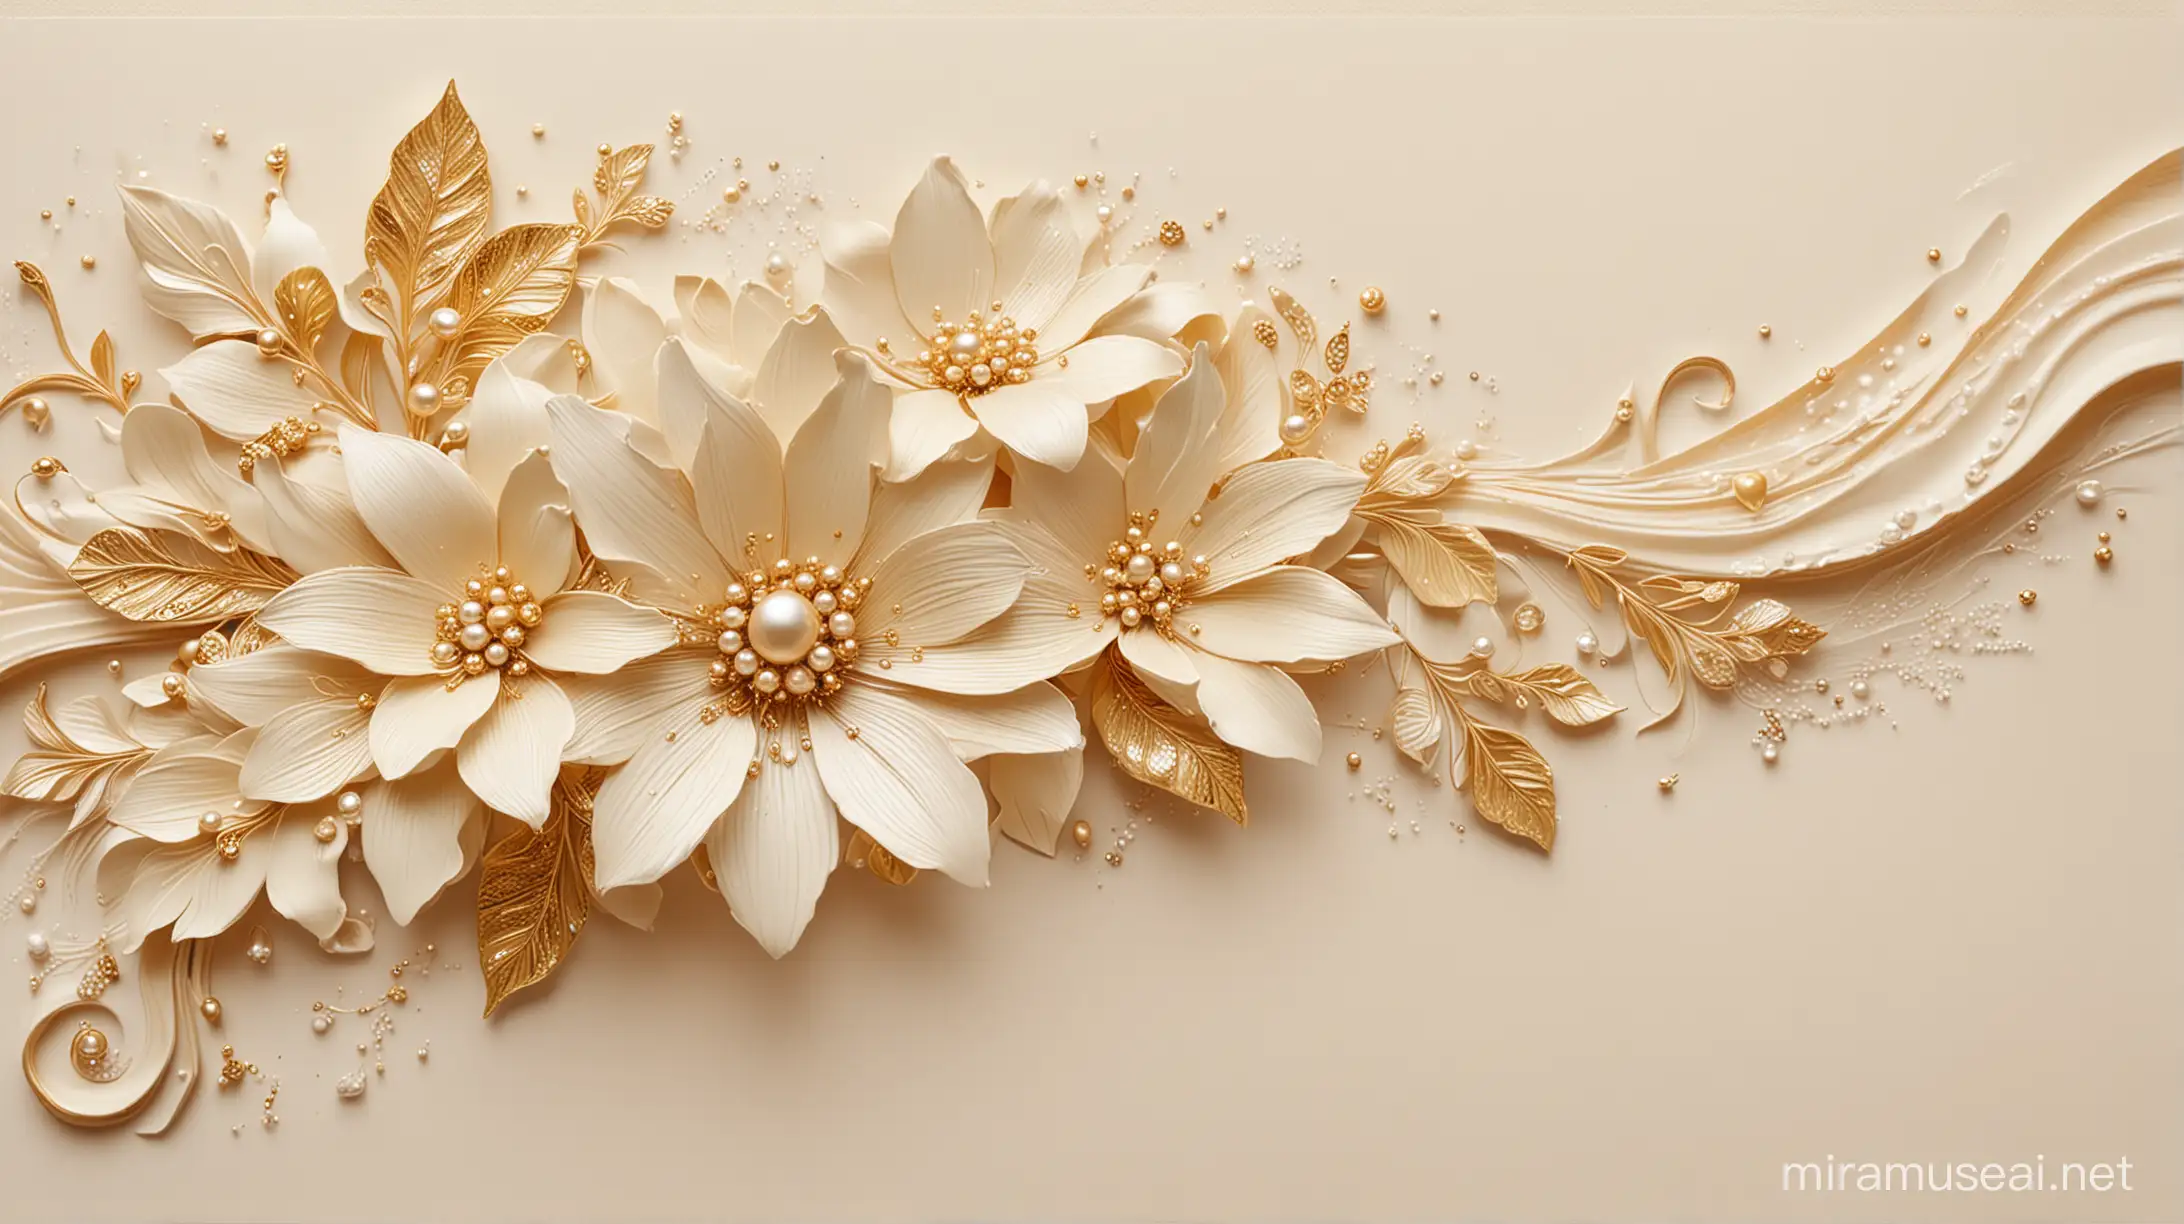 abstract flowers with gold and pearls on a cream background